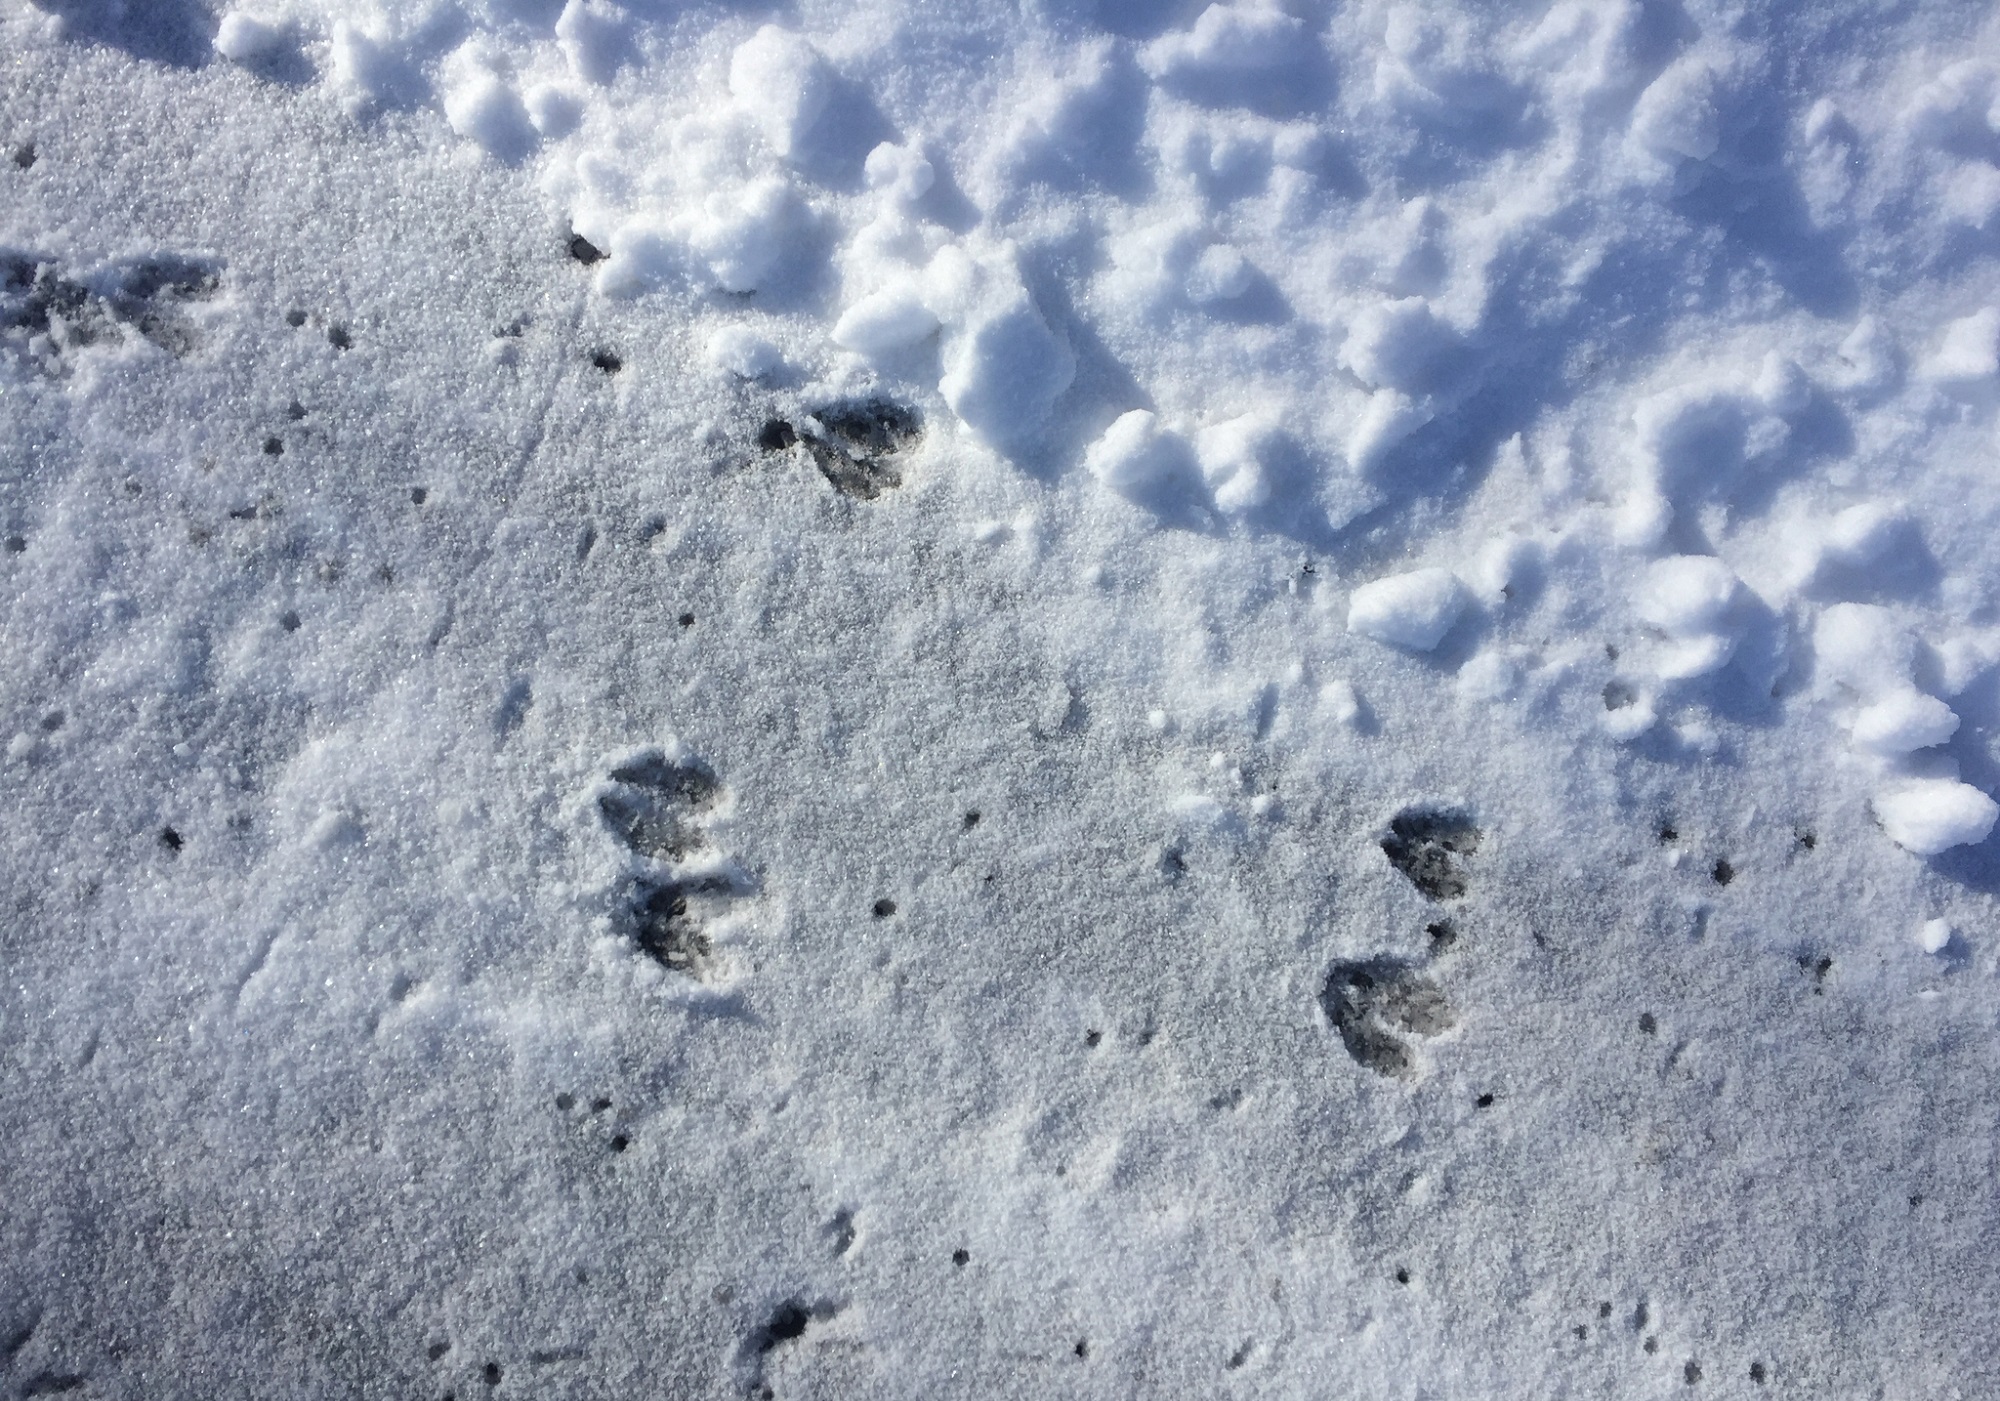 White-tailed Deer tracks photographed in Woodstock, Vermont. © Kent McFarland